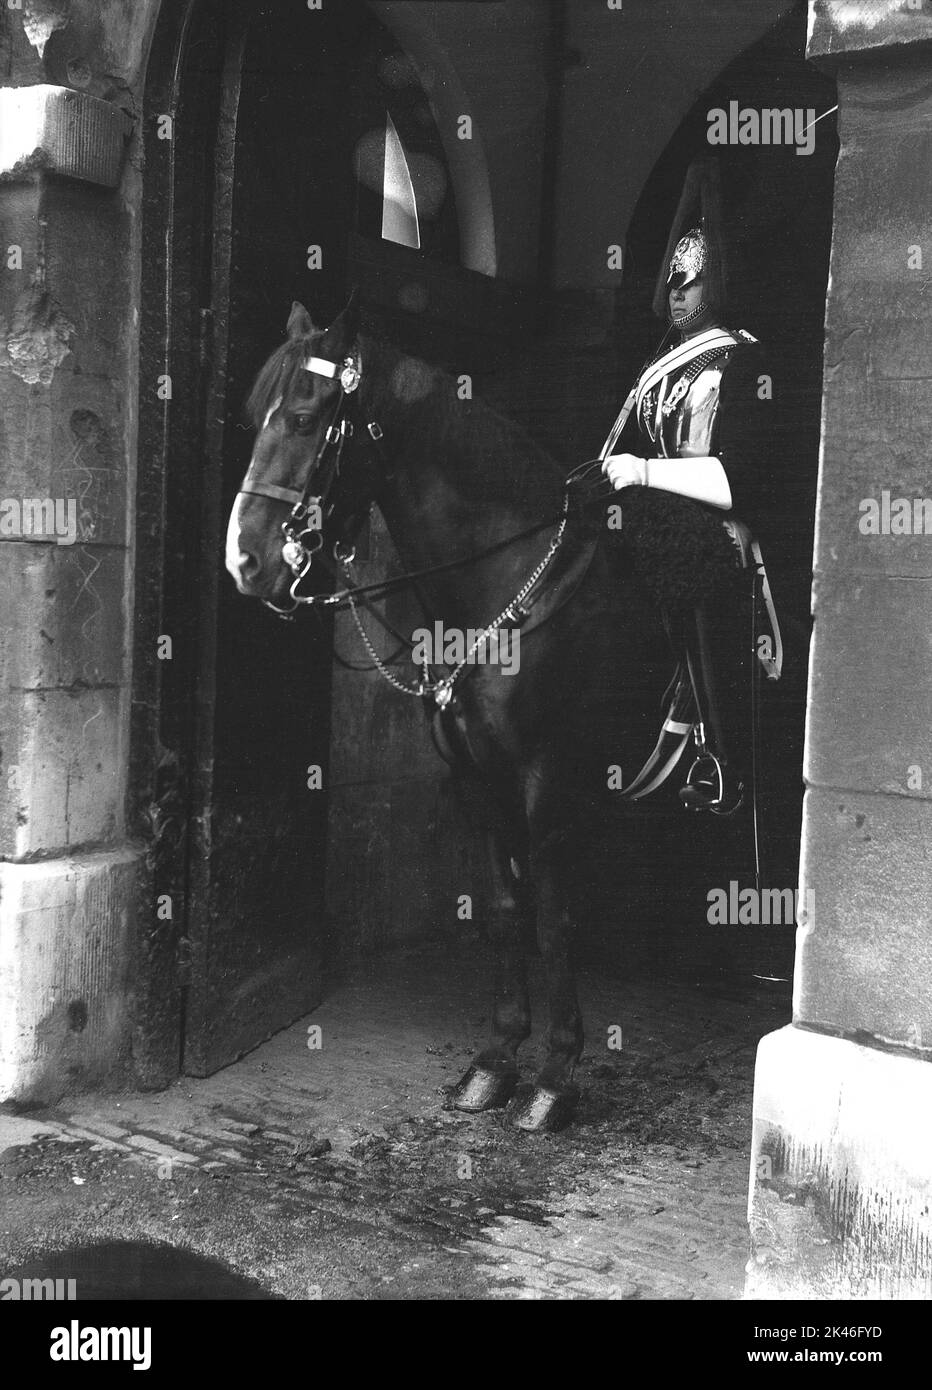 1958, historical, a King's Life Guard on horseback, on sentry duty to Horse Guards, the official entrance to the Palace of Whitehall, Westminster, London, England, UK. The mounted guardsman is wearing full uniform, tunic and ceremonial headgear known as an Albert helmet. Stock Photo